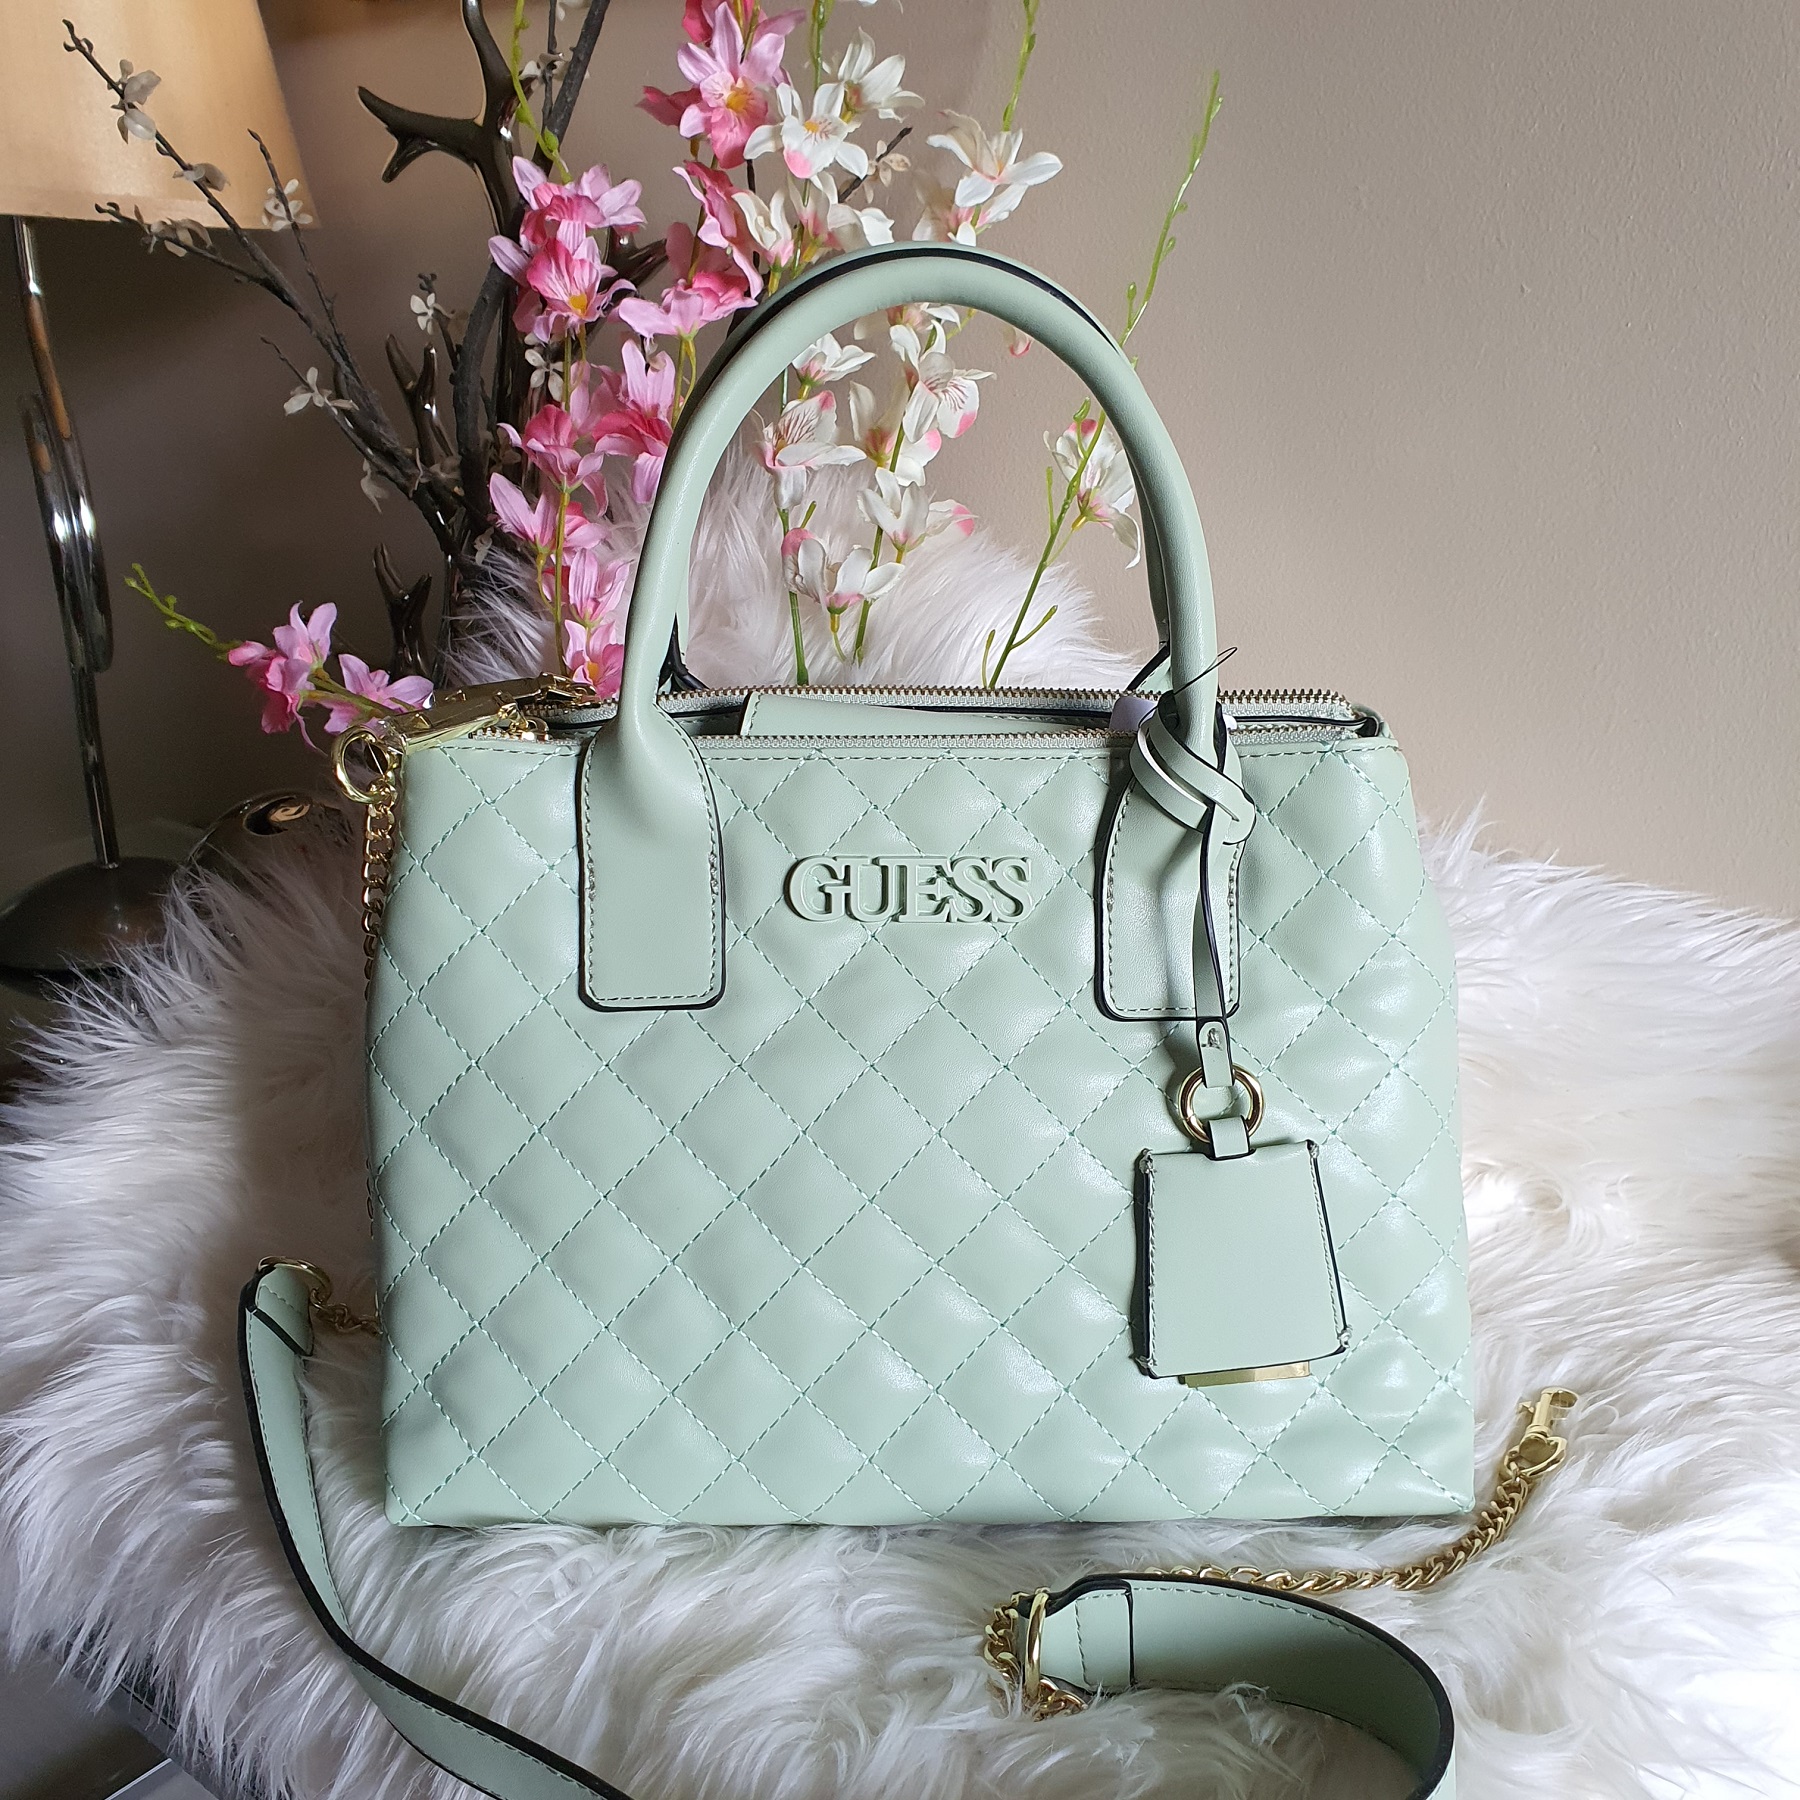 Guess | Bags | Guess Purse With Matching Wristlet | Poshmark